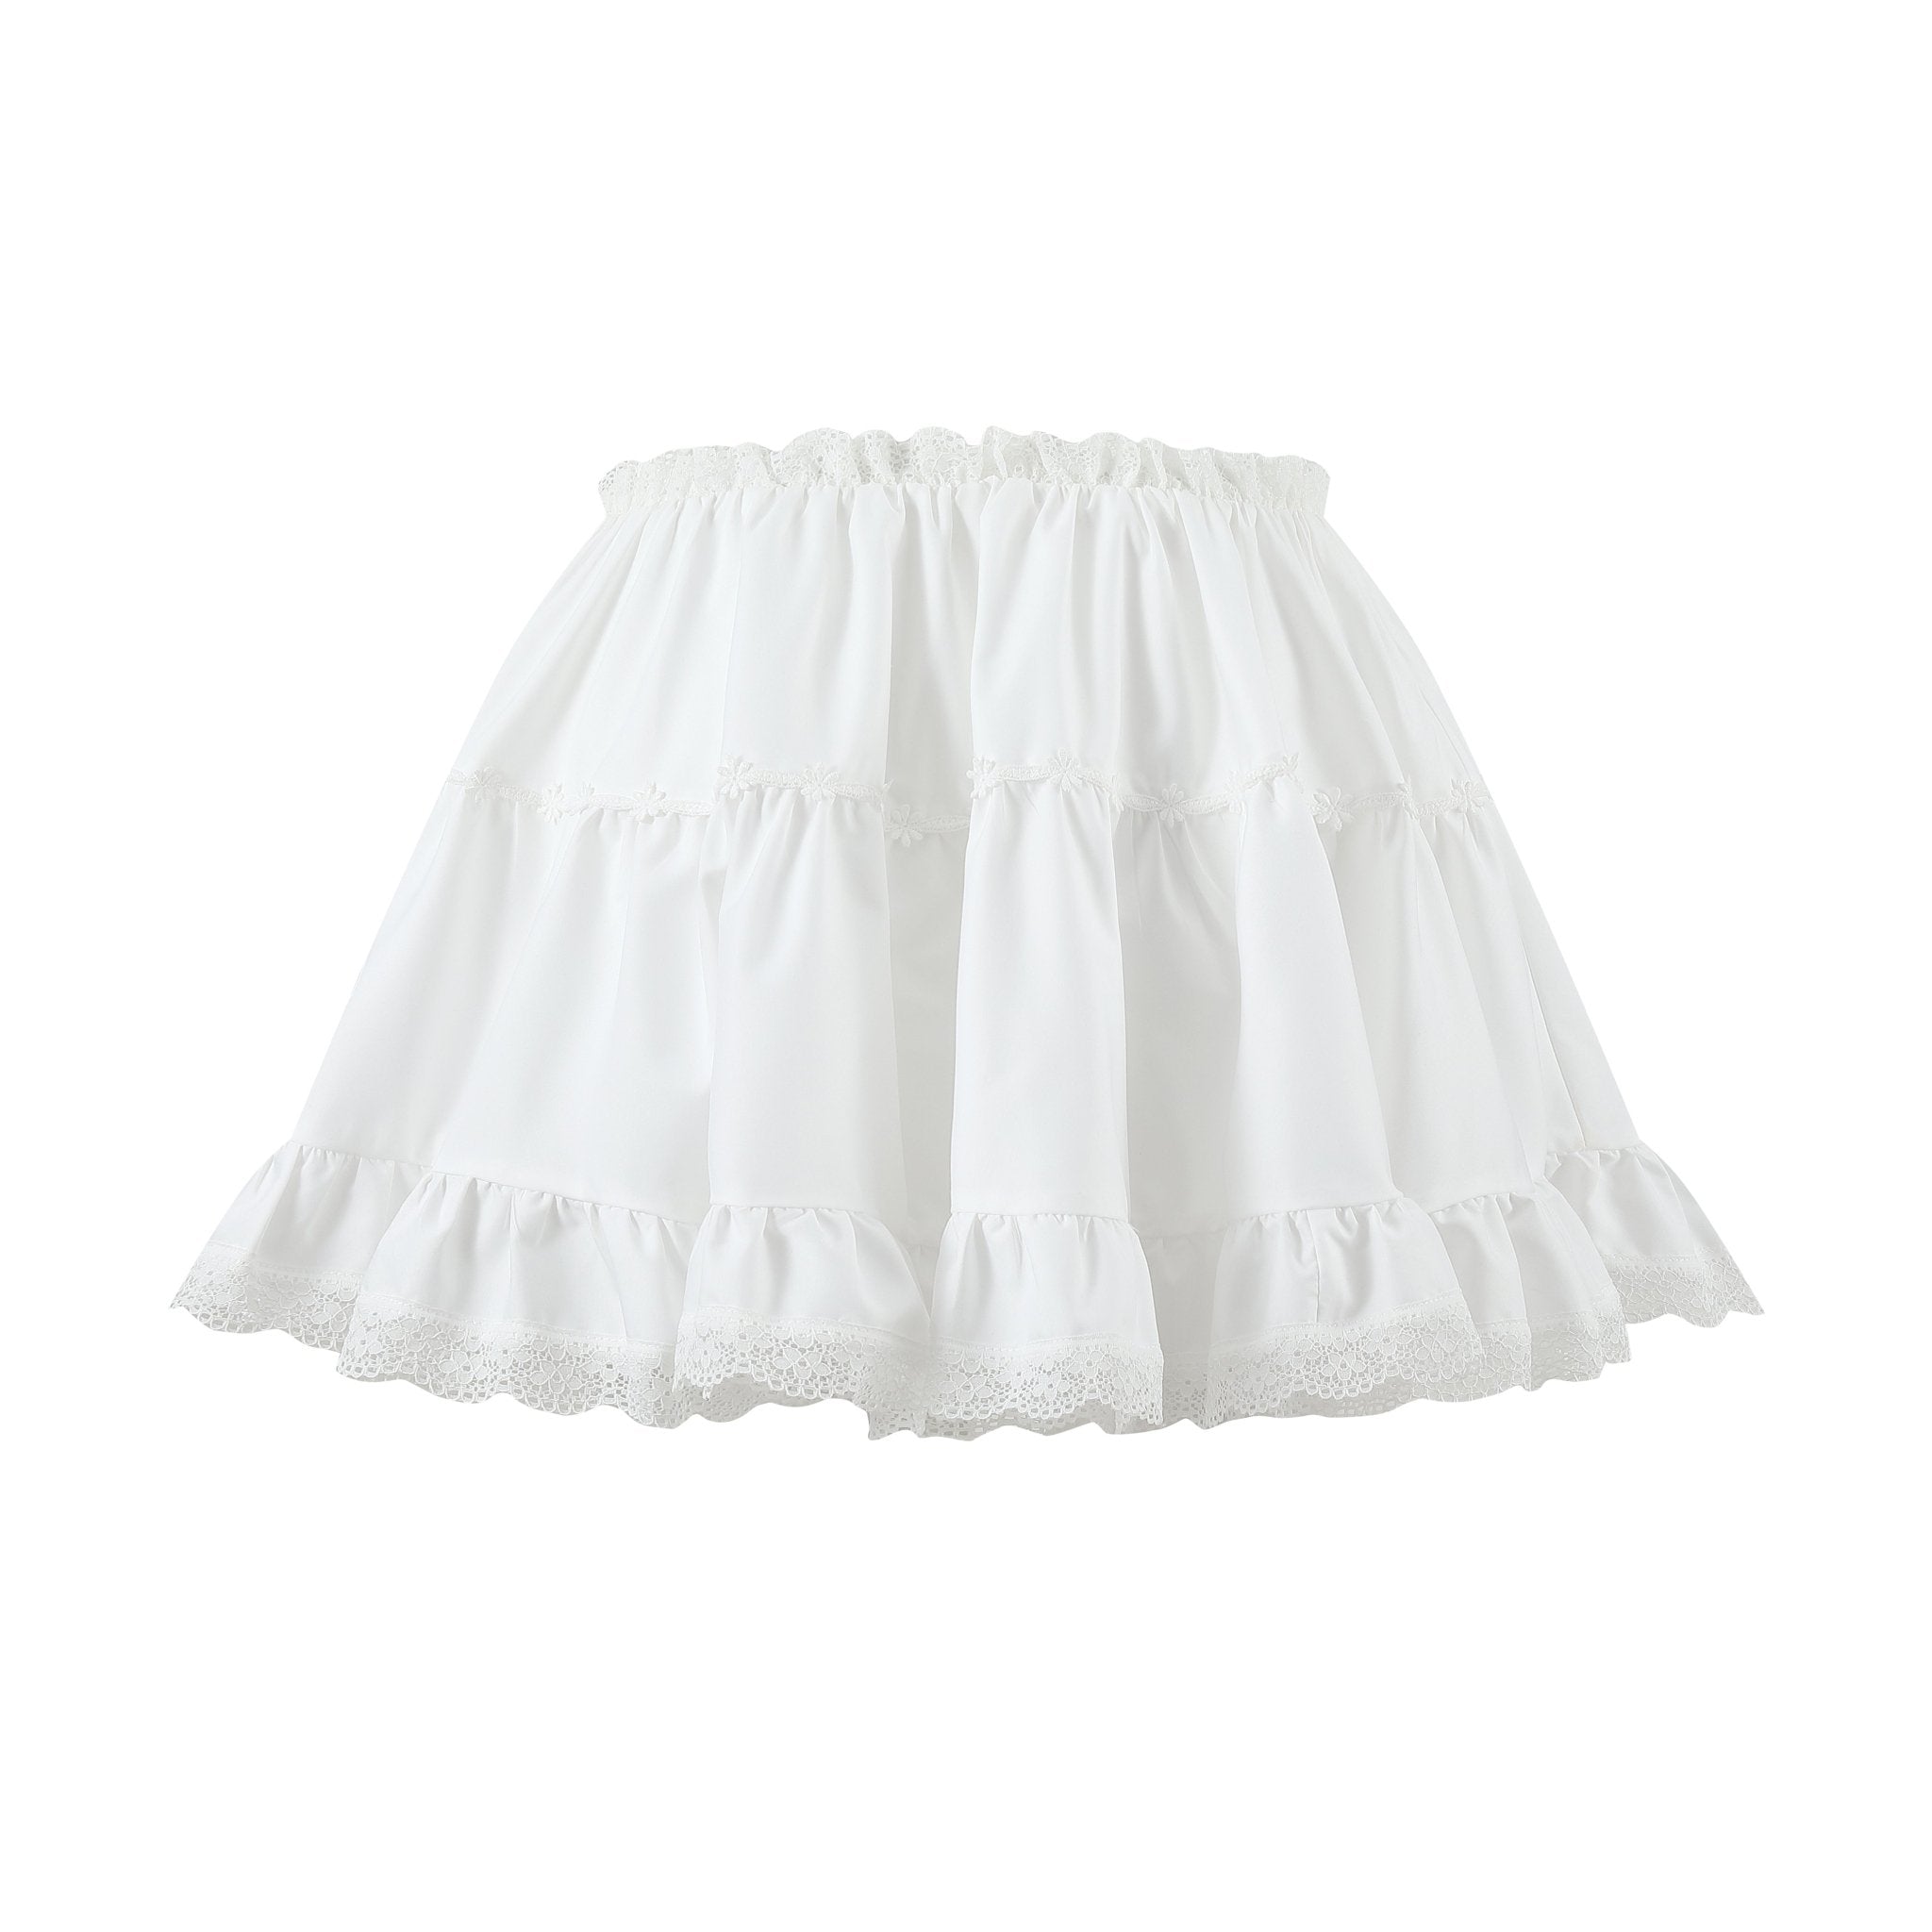 THREE QUARTERS White Lace Lace Ballet Halter Skirt | MADA IN CHINA